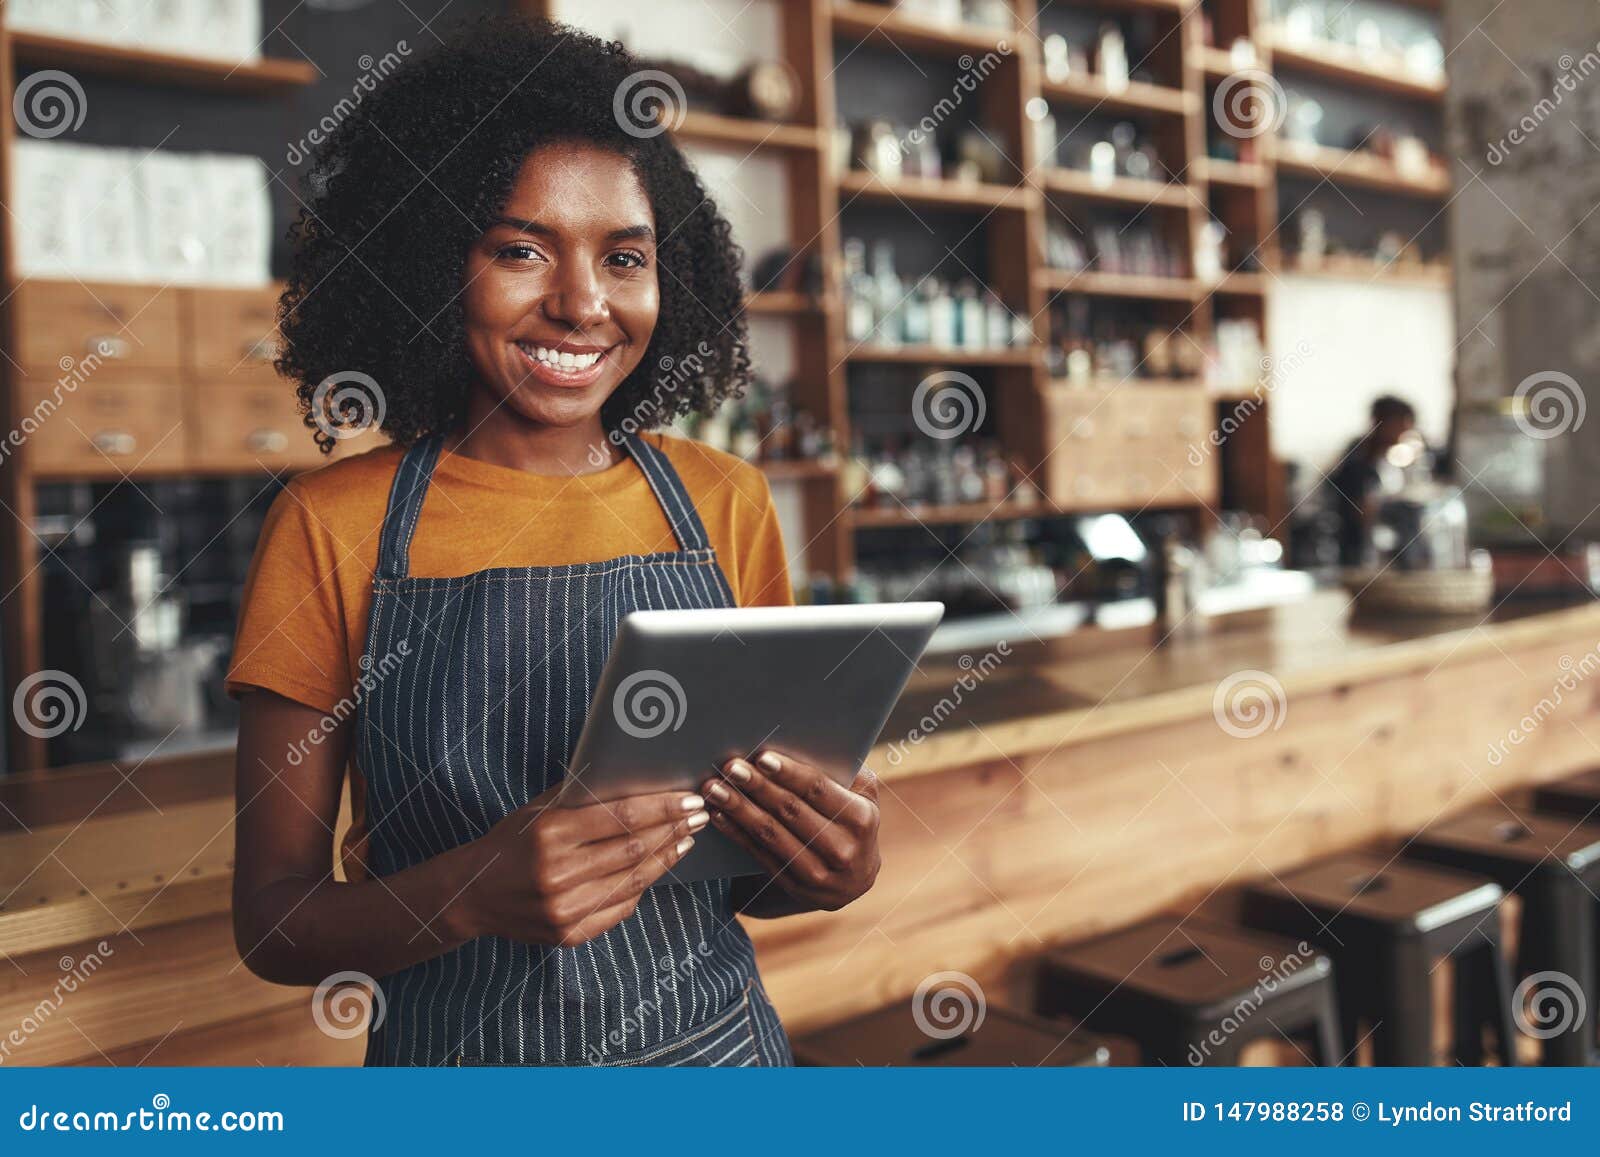 portrait of an african young female cafe owner